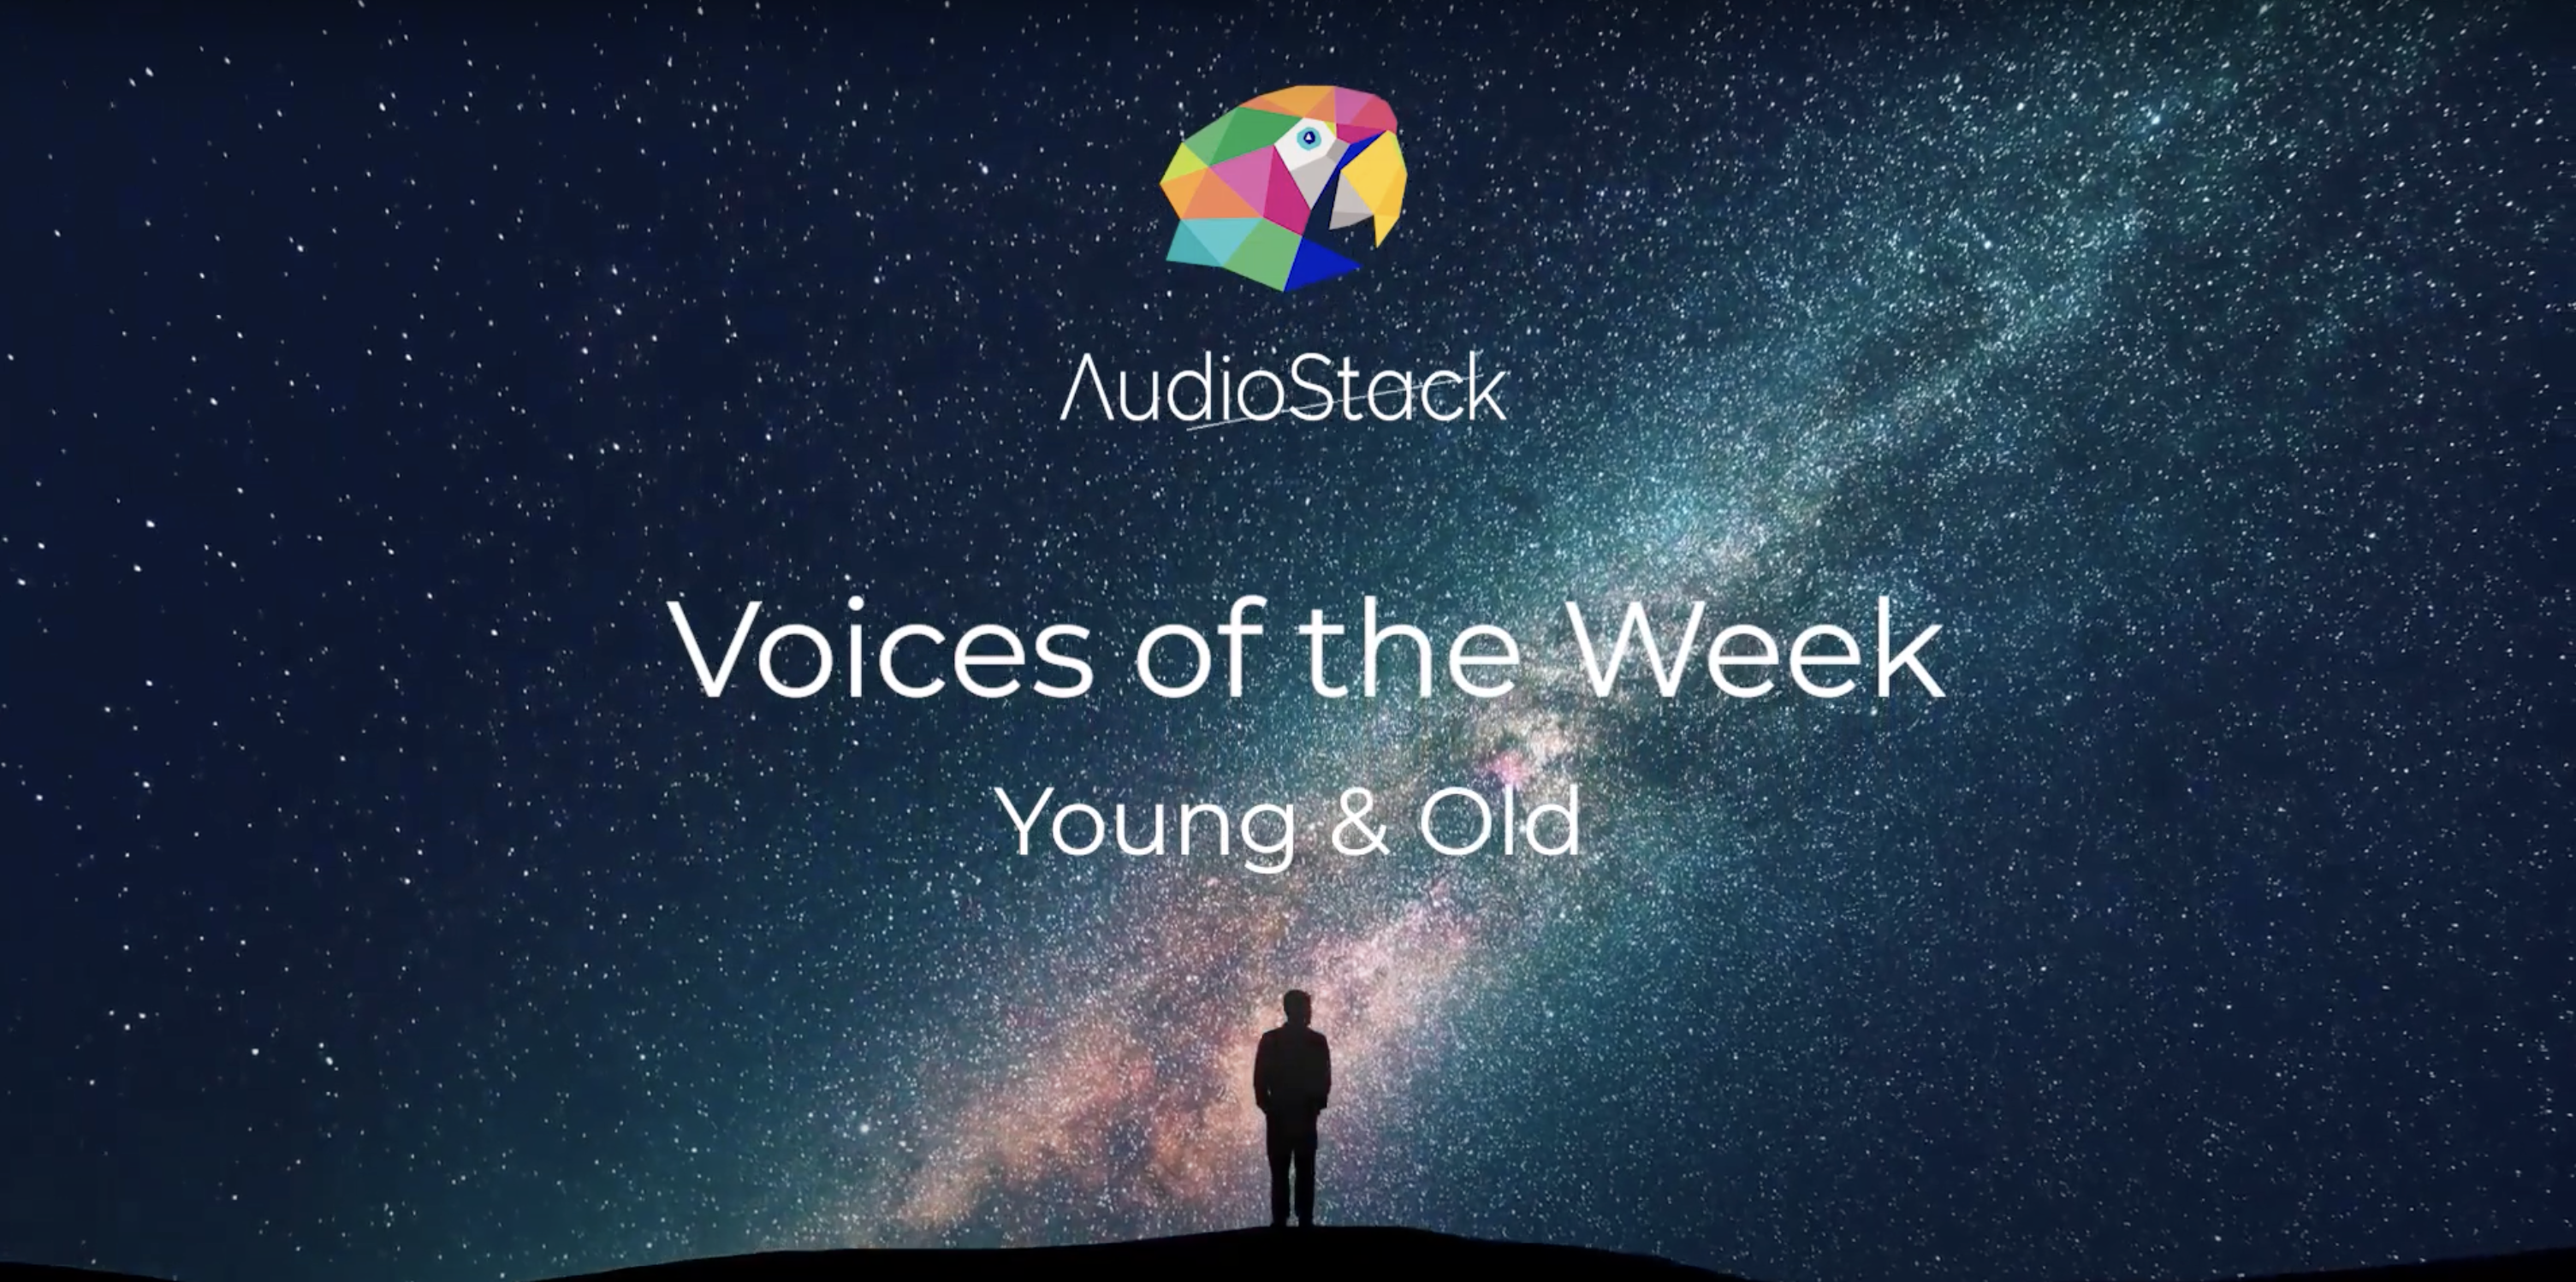 In this week's 'Voice of the Week', we highlight voices from young to old, through this AI-scripted poem about life's journey.